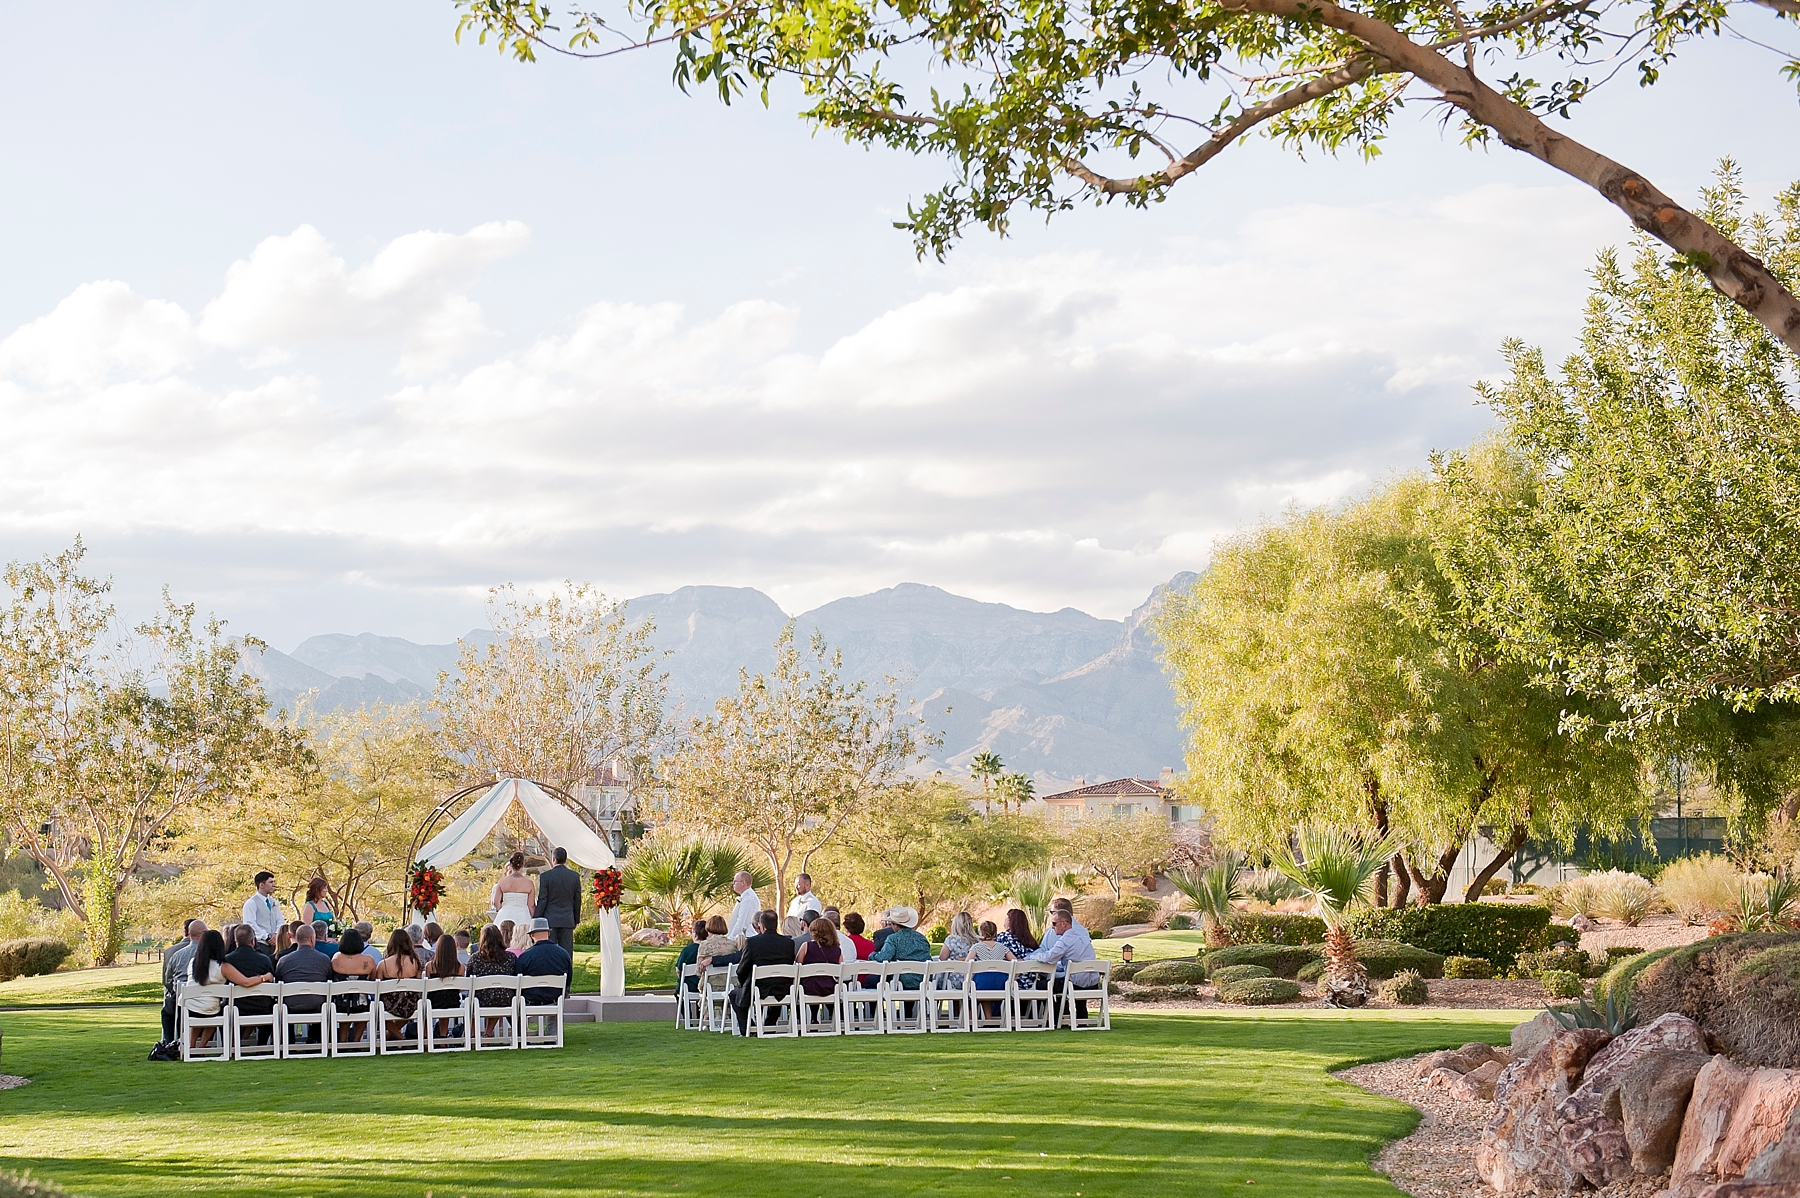 Venue: Red Rock Country Club